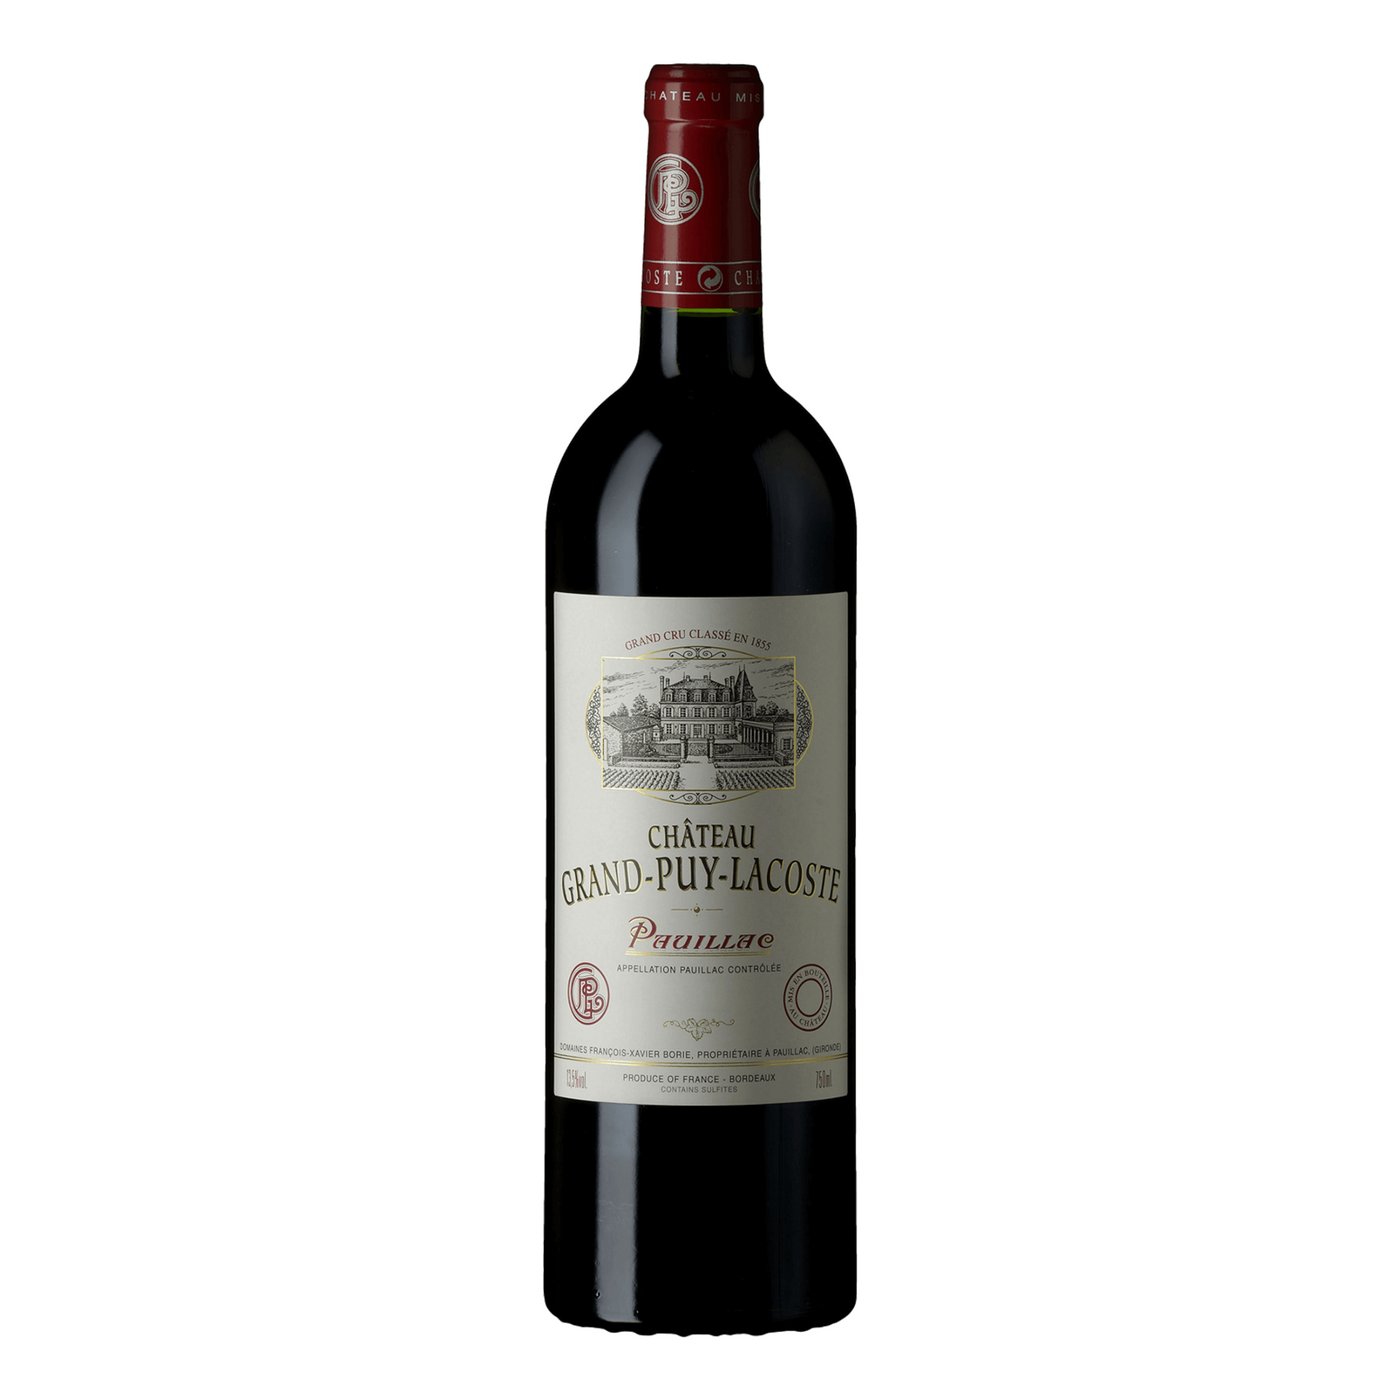 Chateau Grand-Puy-Lacoste Pauillac 2019